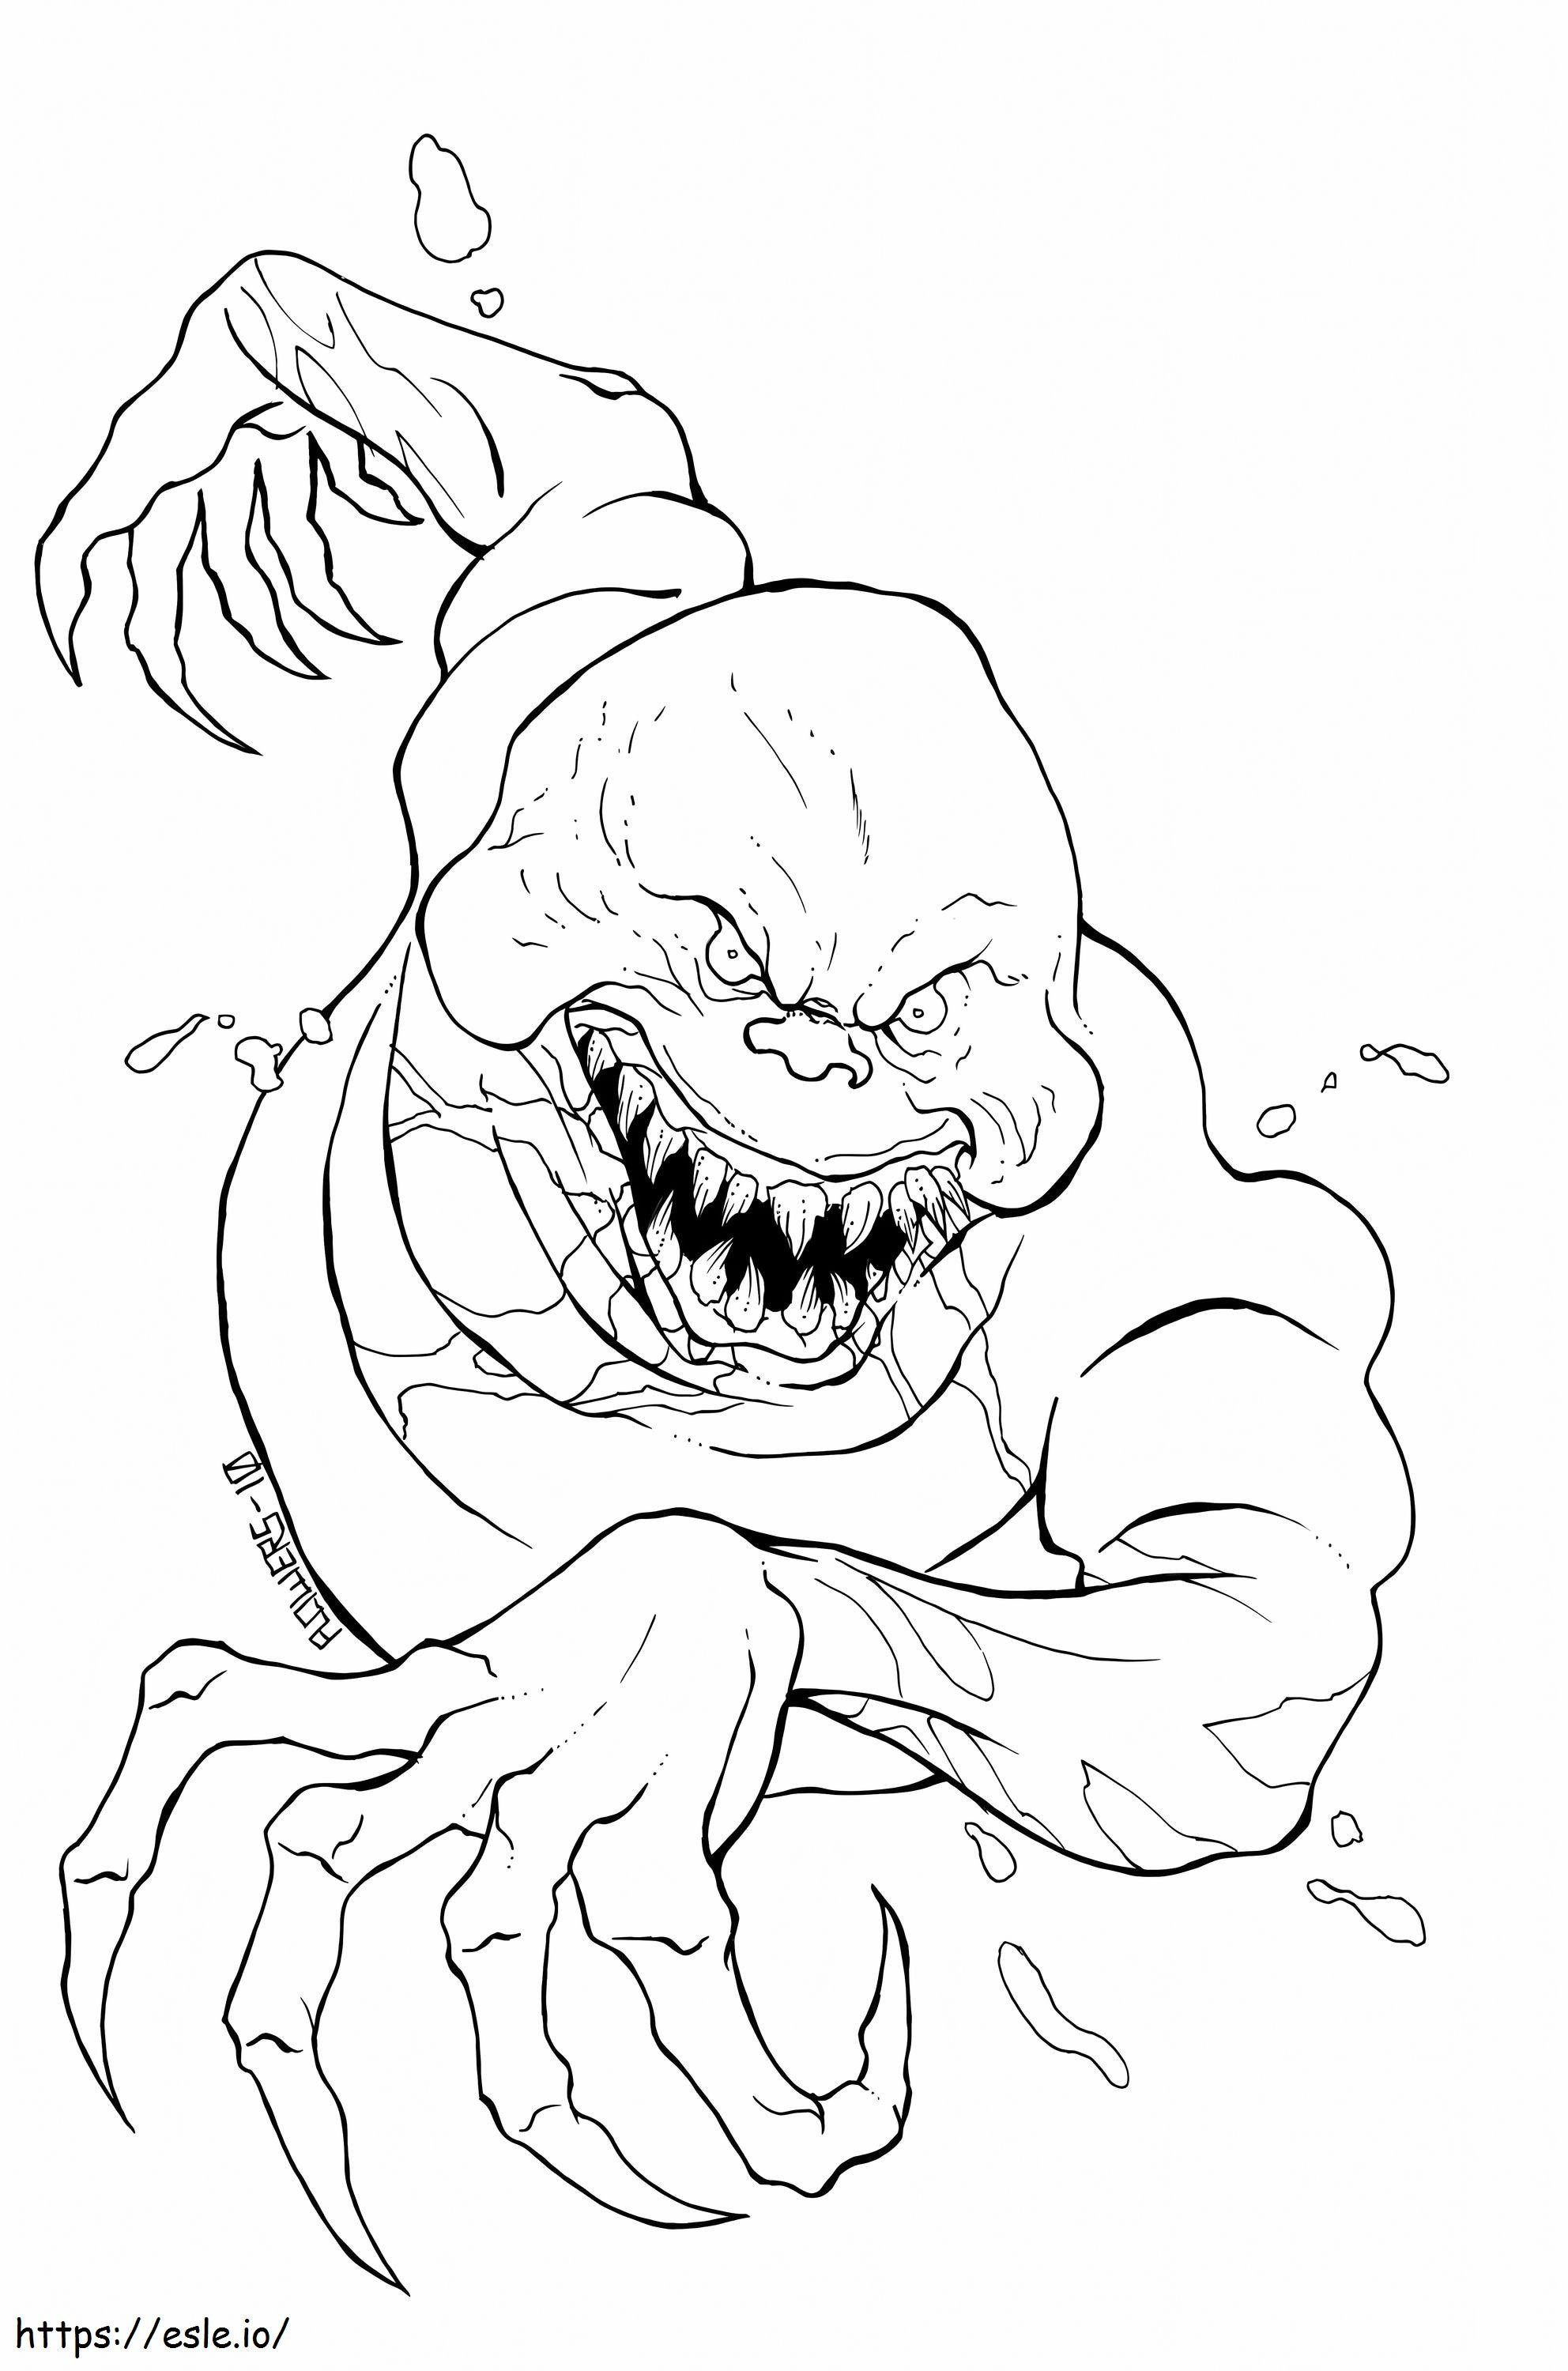 Evil Ghost coloring page